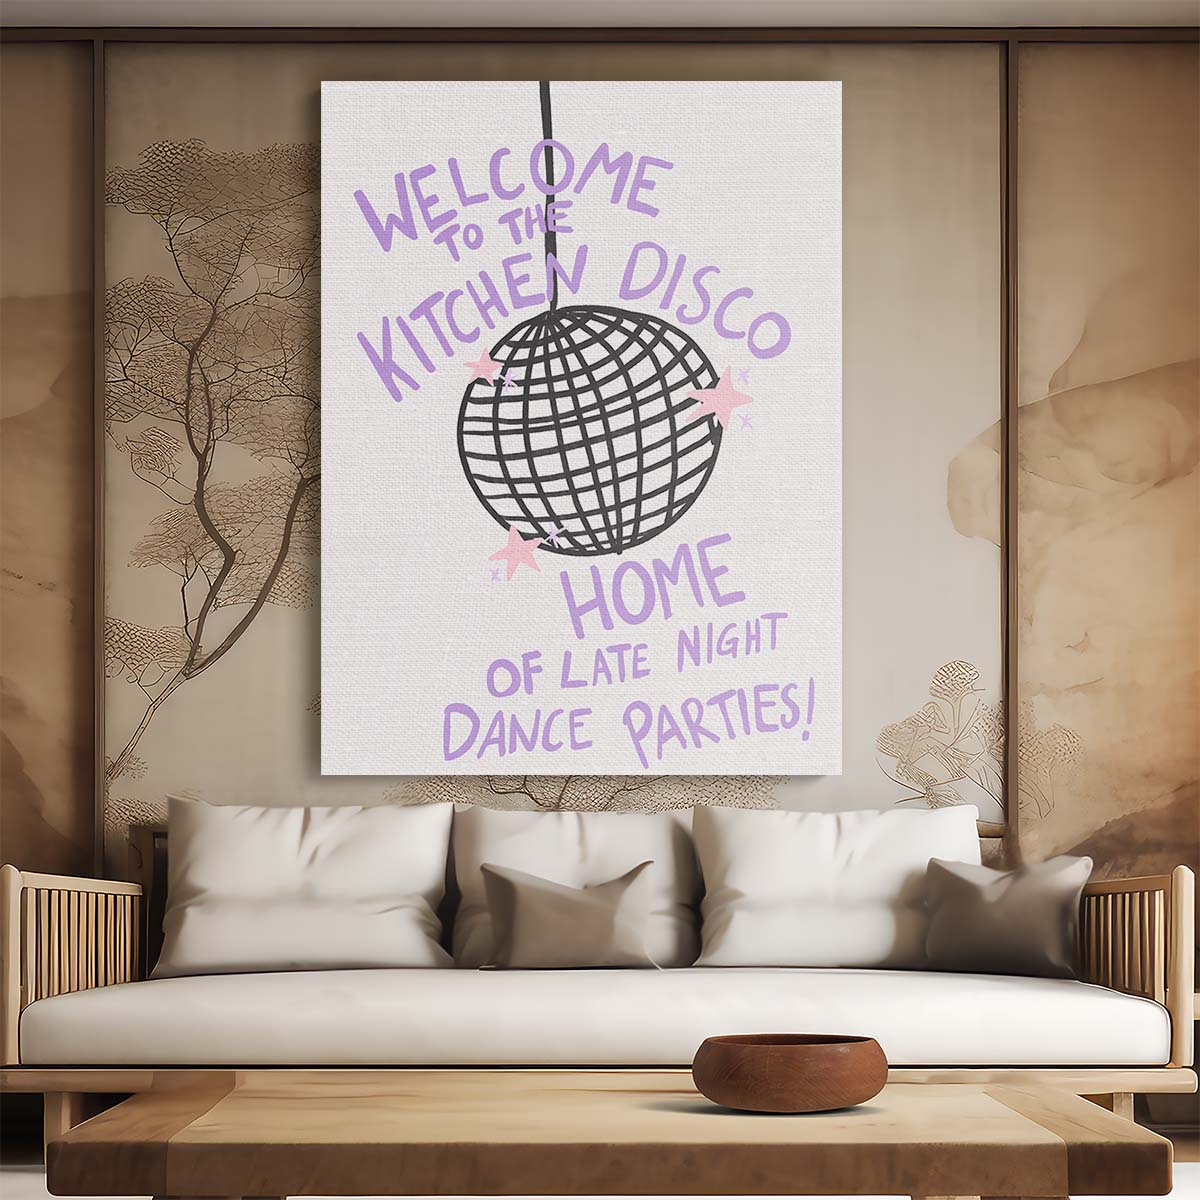 Inspirational Kitchen Disco Typography Illustration - Motivational Quote Art by Luxuriance Designs, made in USA